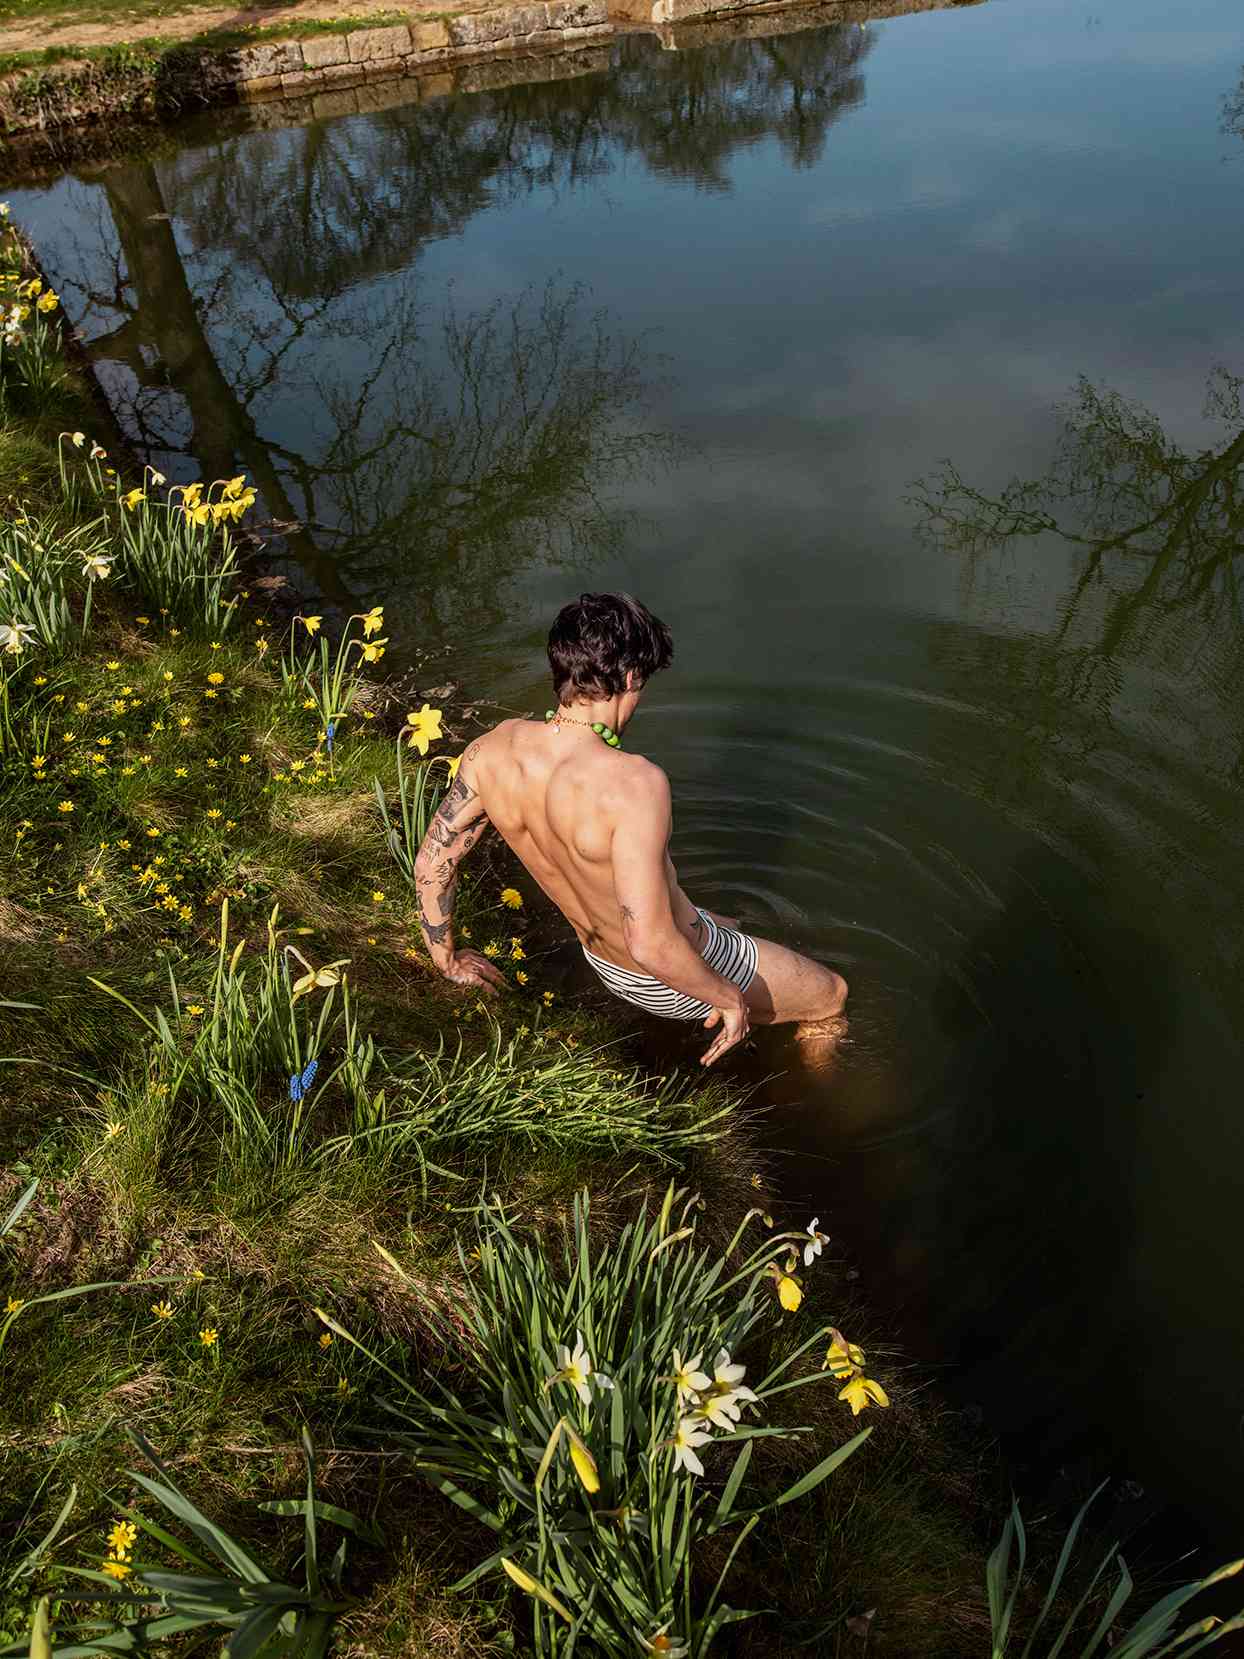 Photograph of Harry Styles entering pond